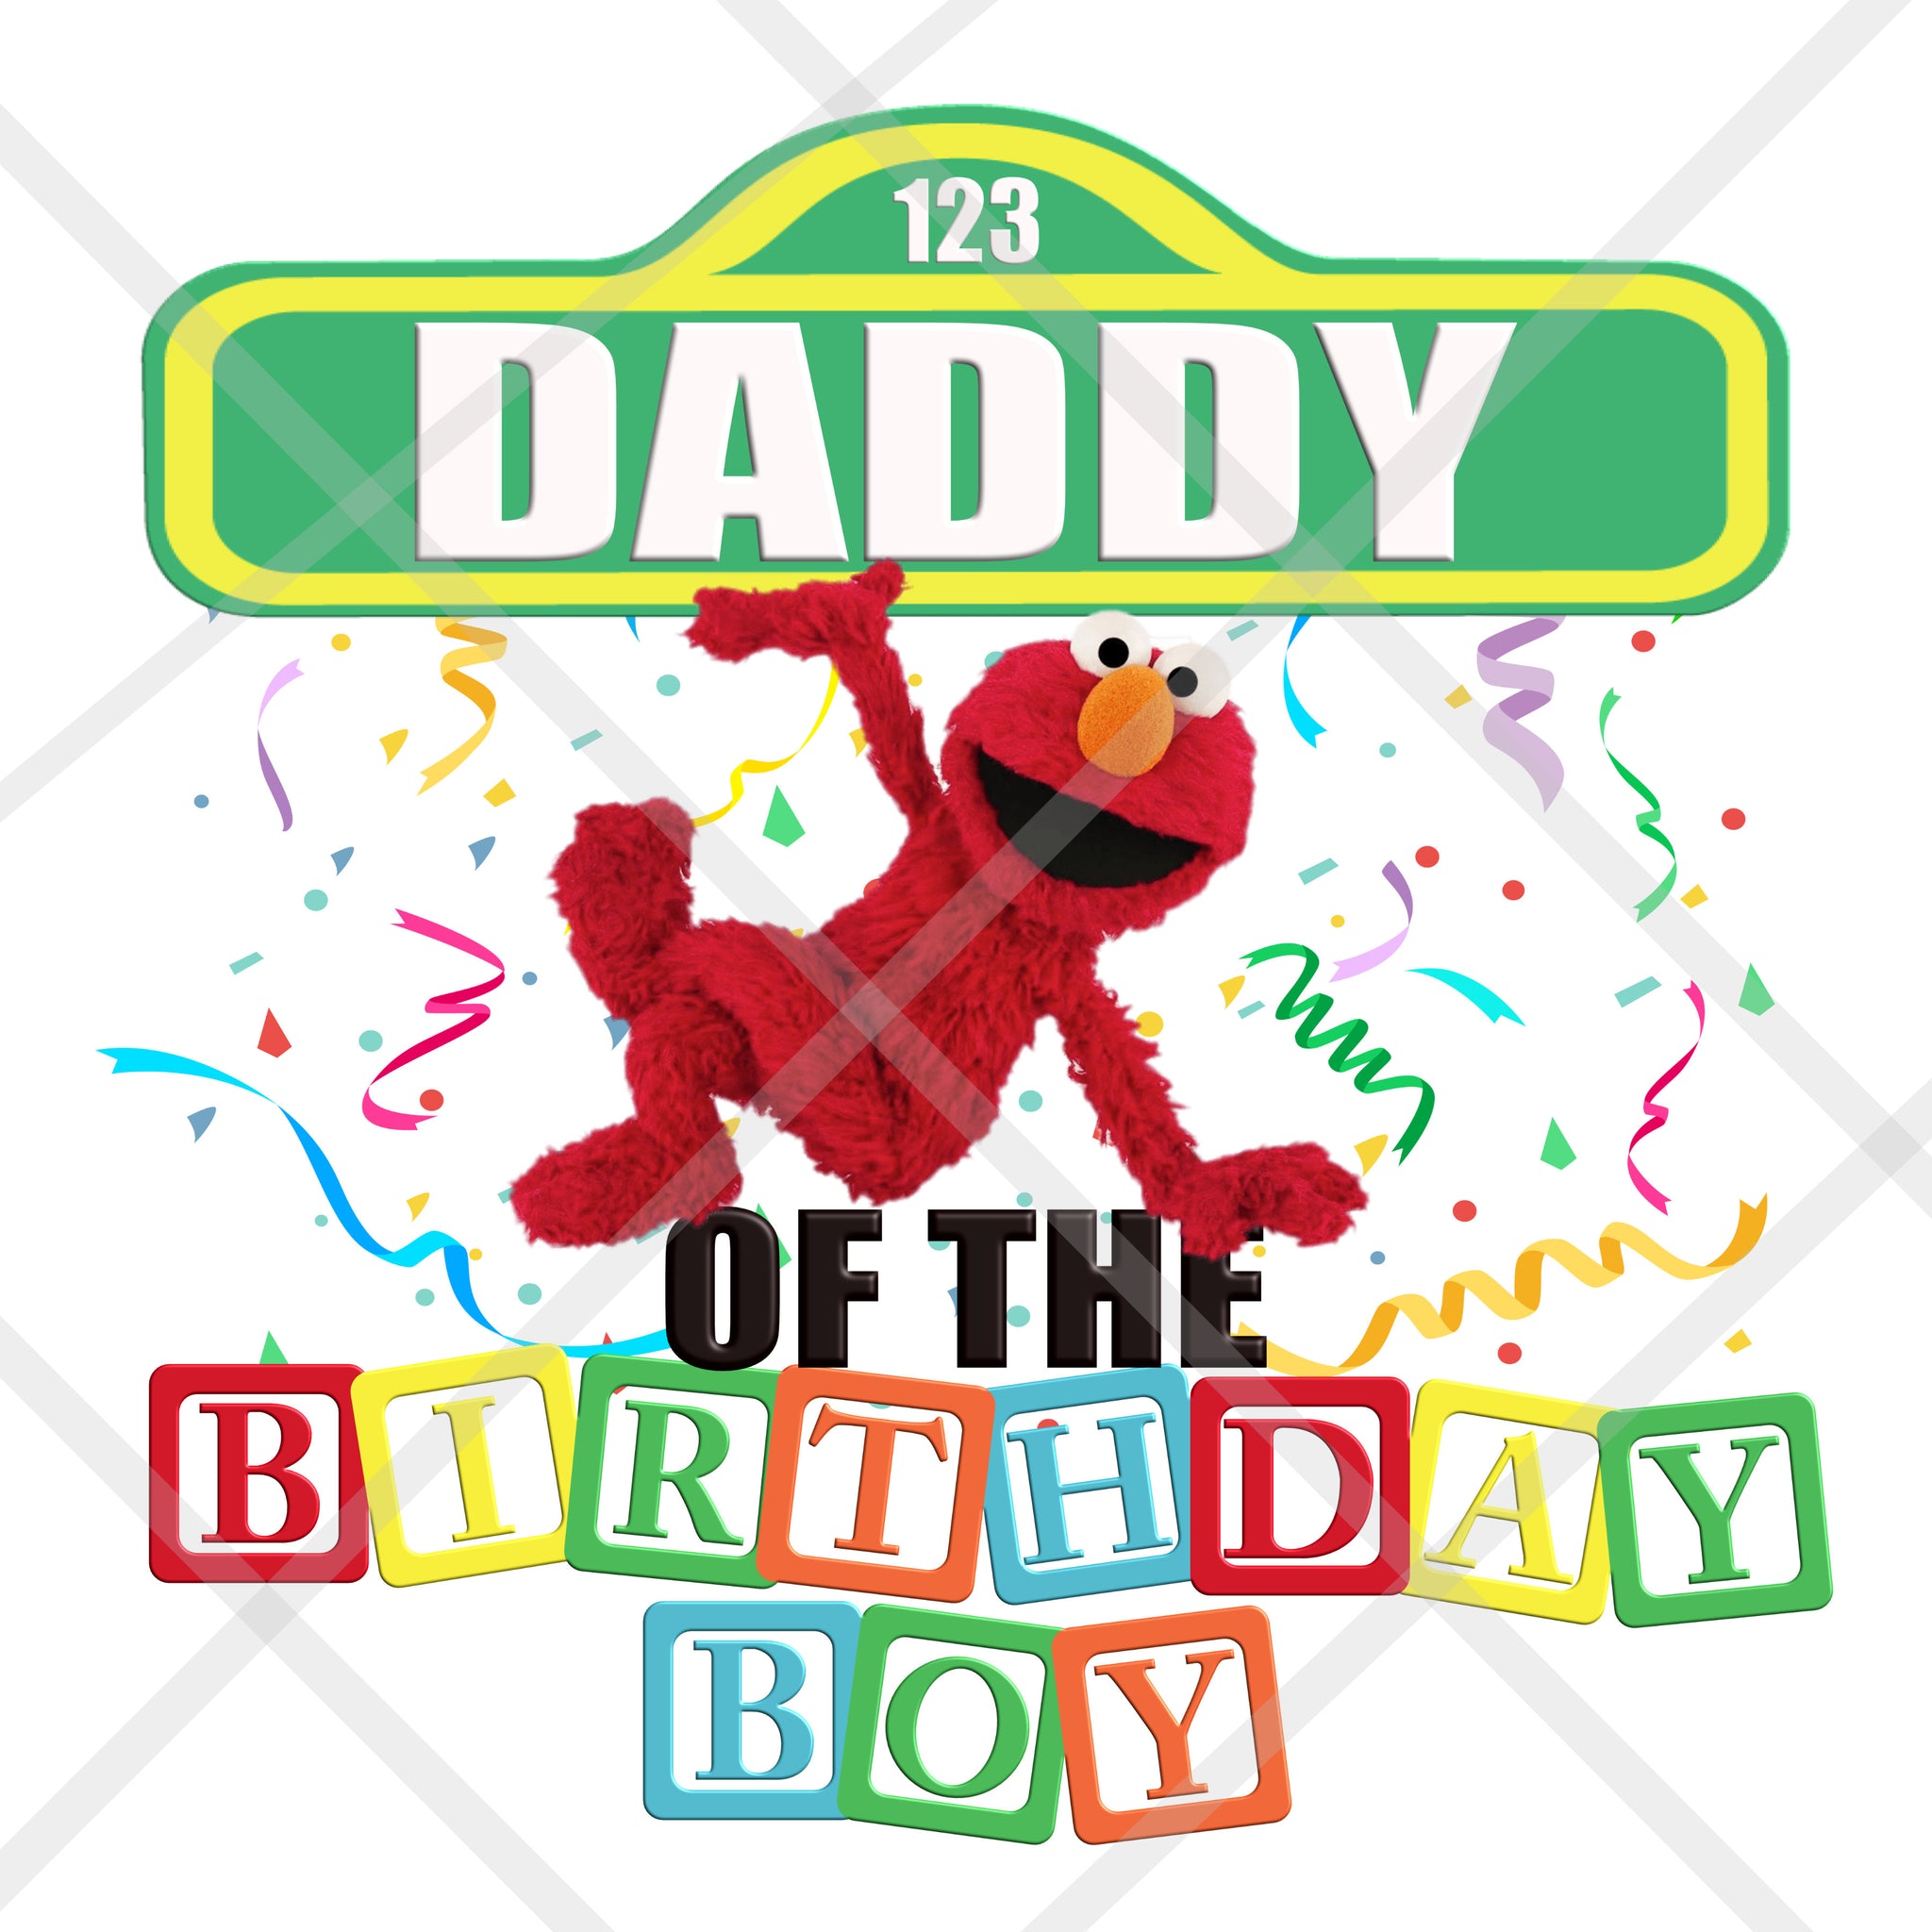 Download Mommy And Daddy Of The Birthday Boy Sesame Street Elmo Abby Png 300dpi Tab S Chic Boutique